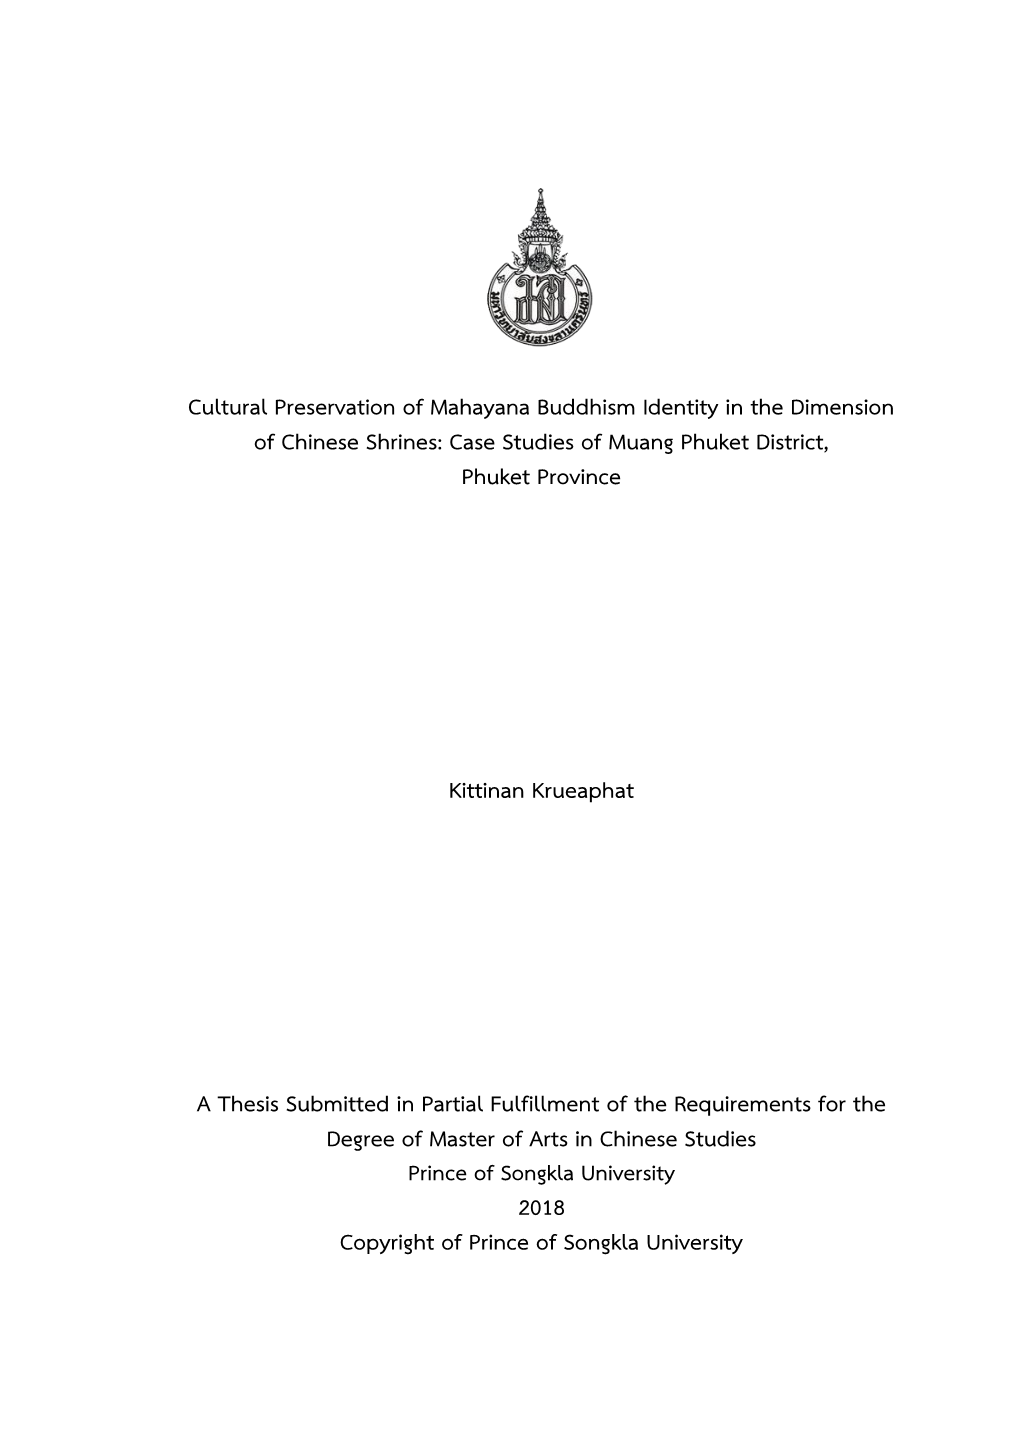 Mahayana Buddhism Identity in the Dimension of Chinese Shrines: Case Studies of Muang Phuket District, Phuket Province